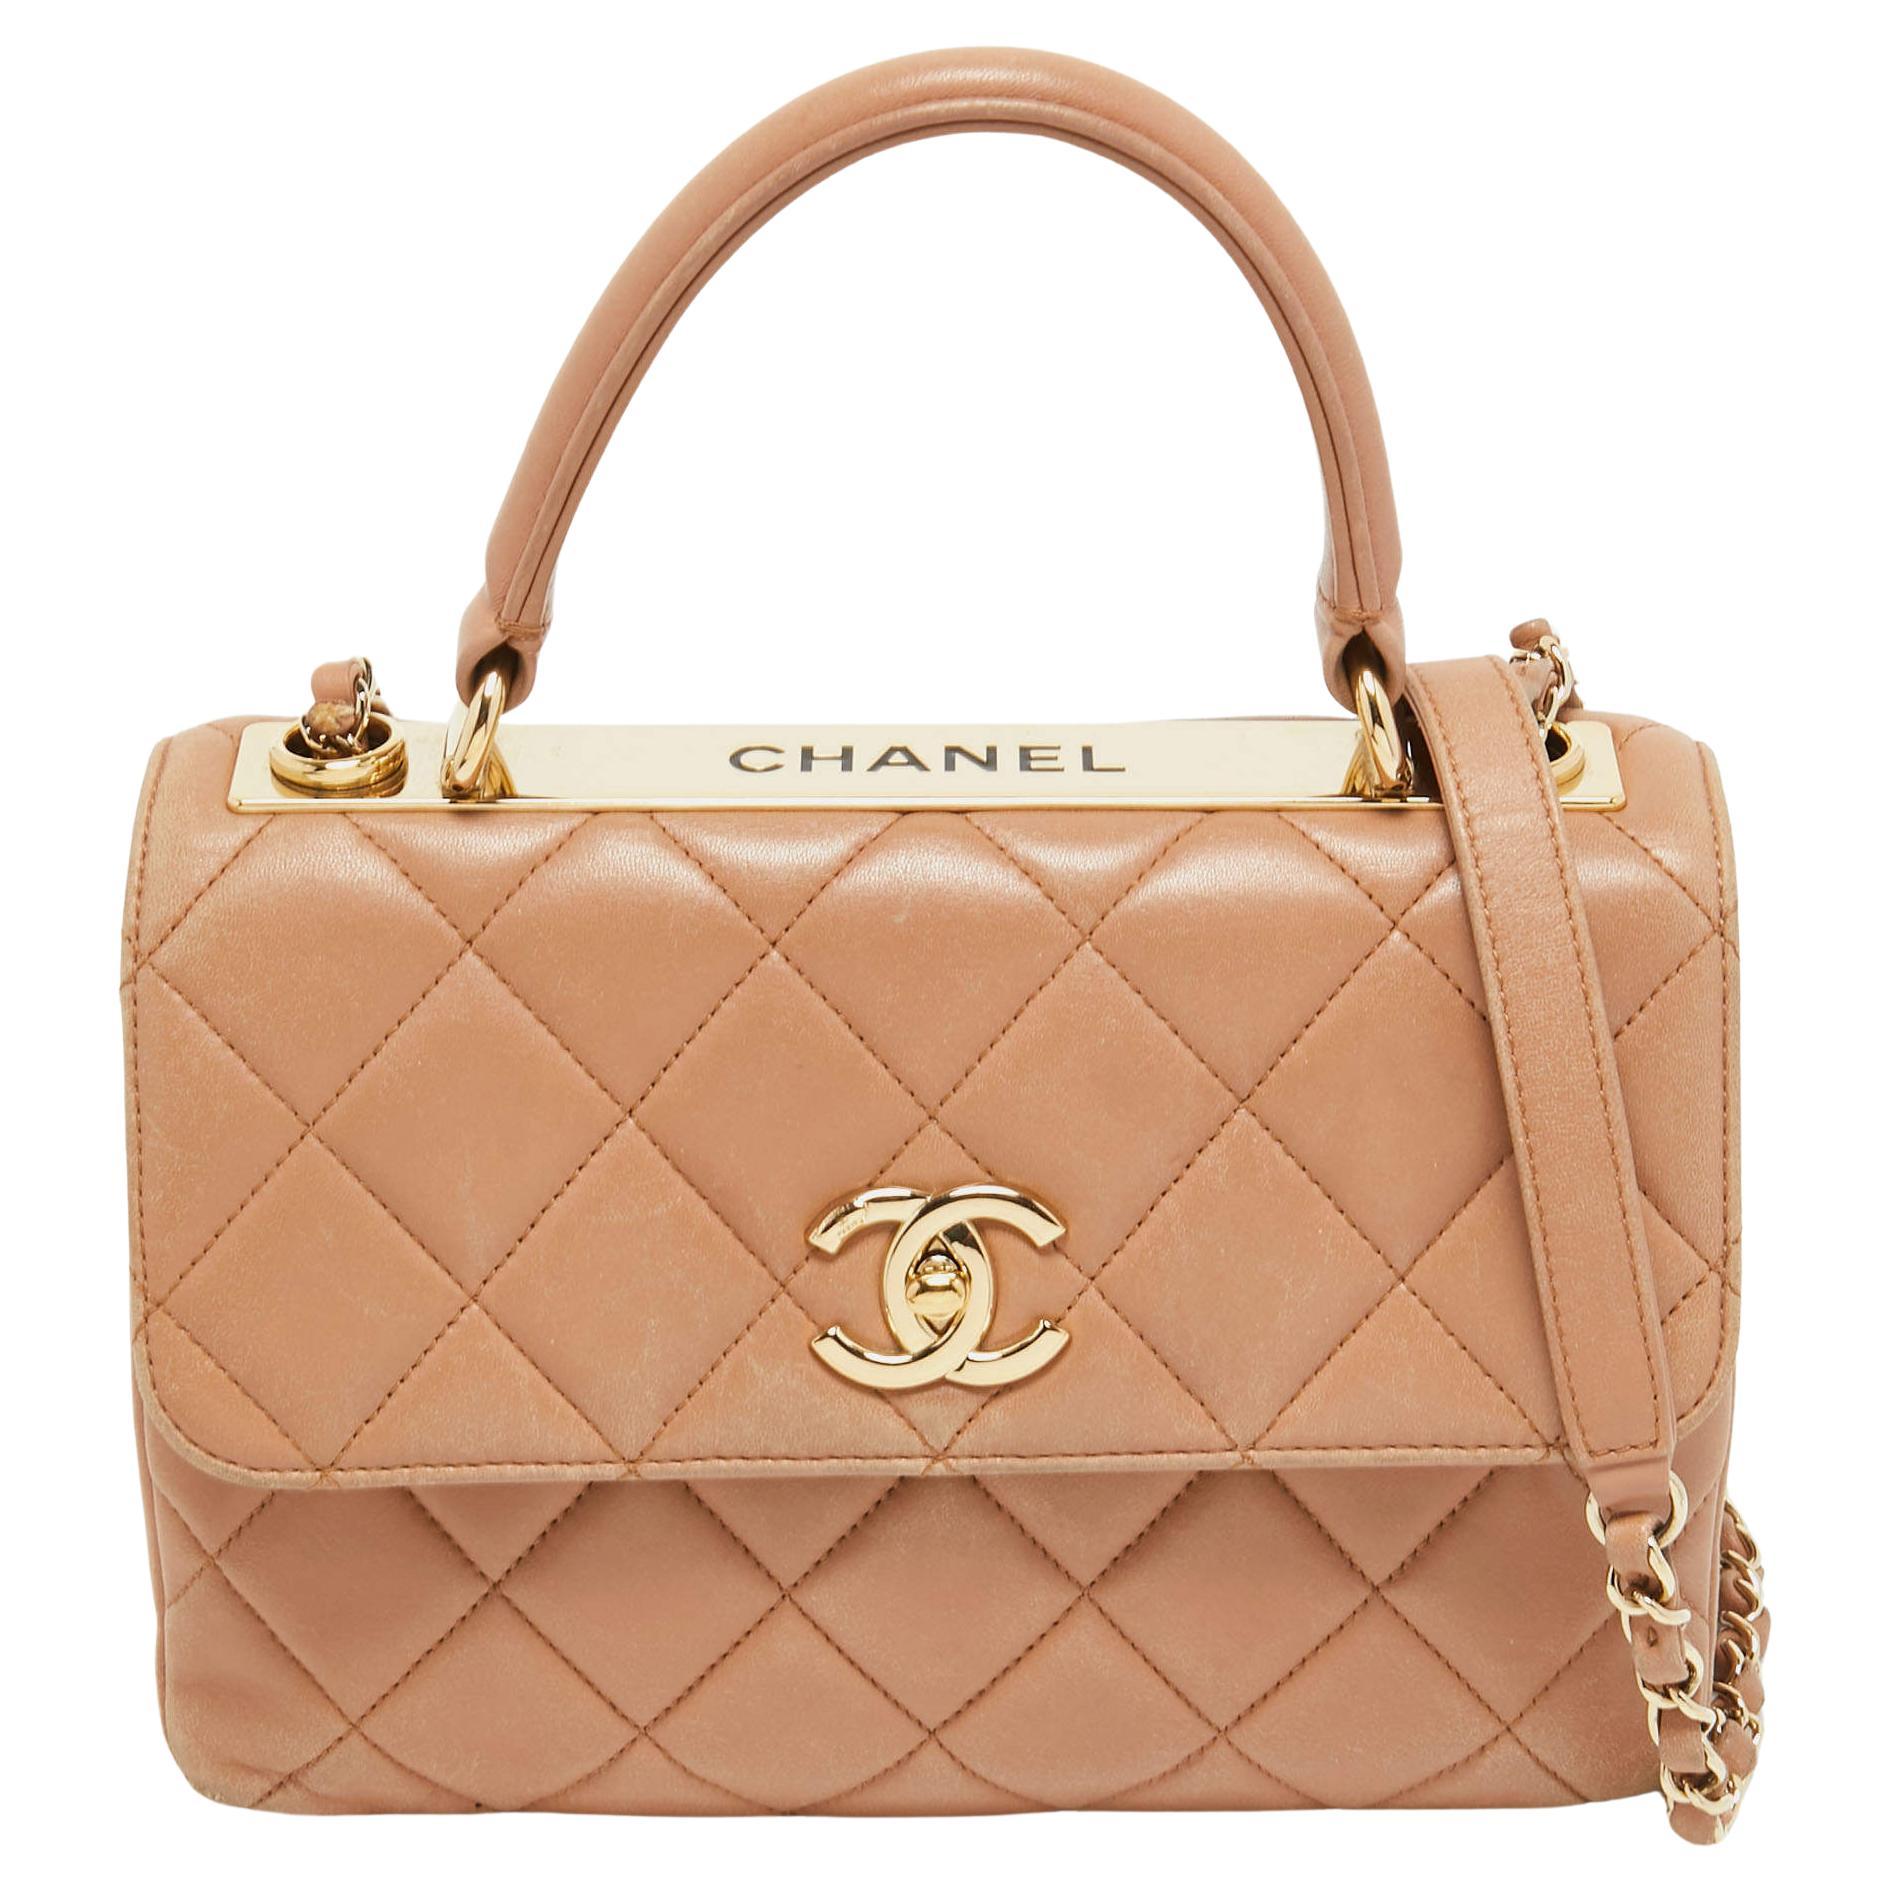 How can you tell if a Chanel Flap bag is real?